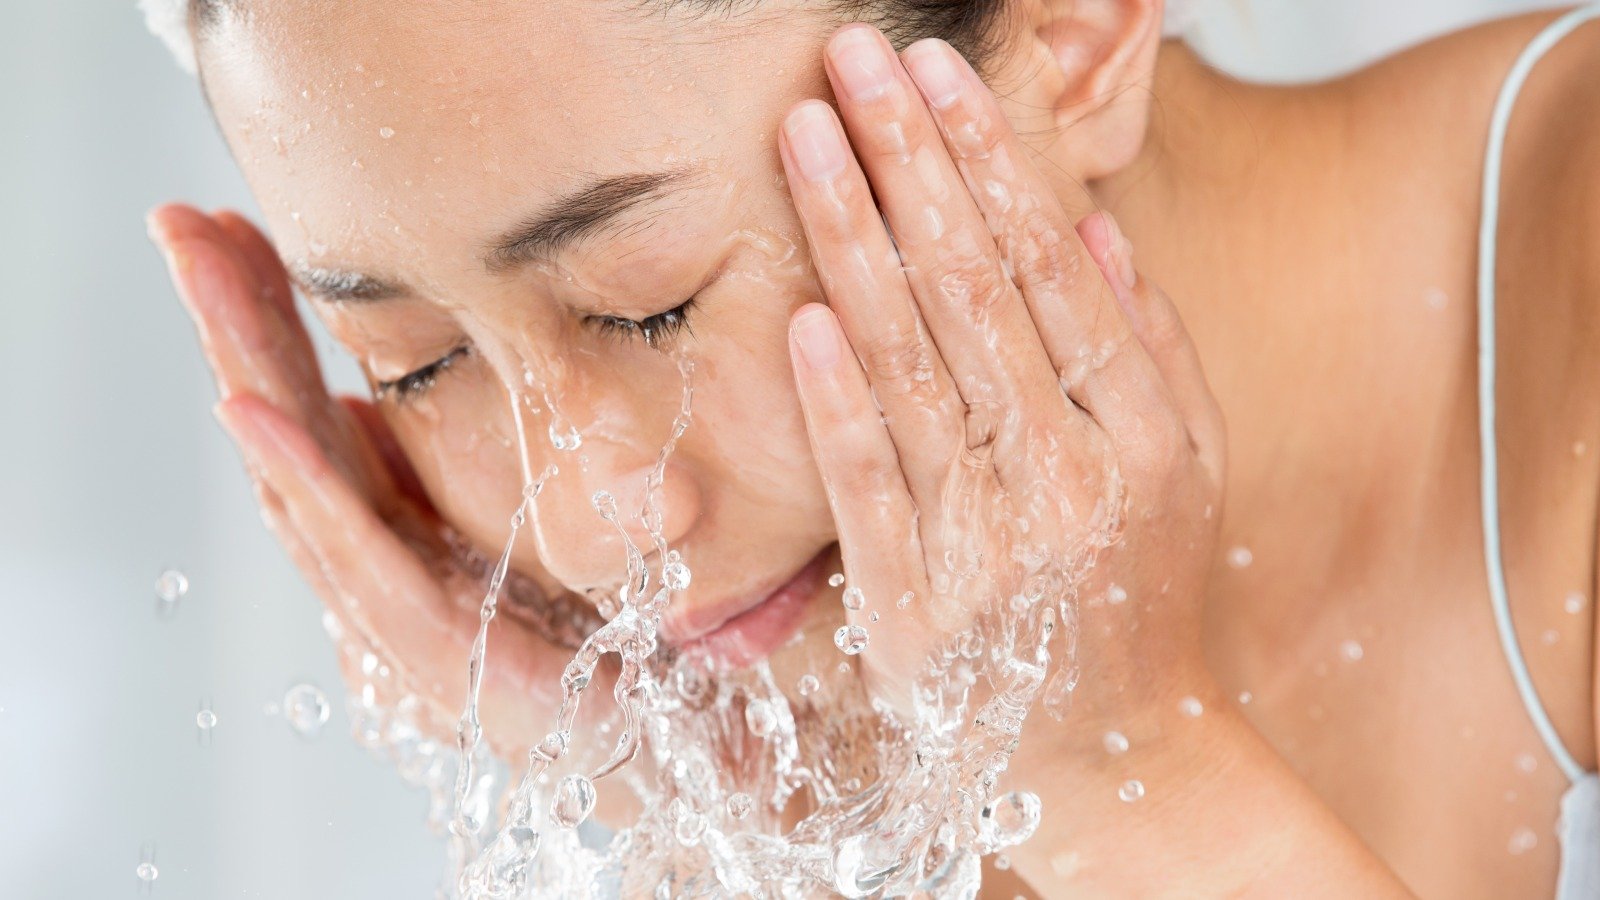 You Should Never Wash Your Face In The Shower. Here's Why